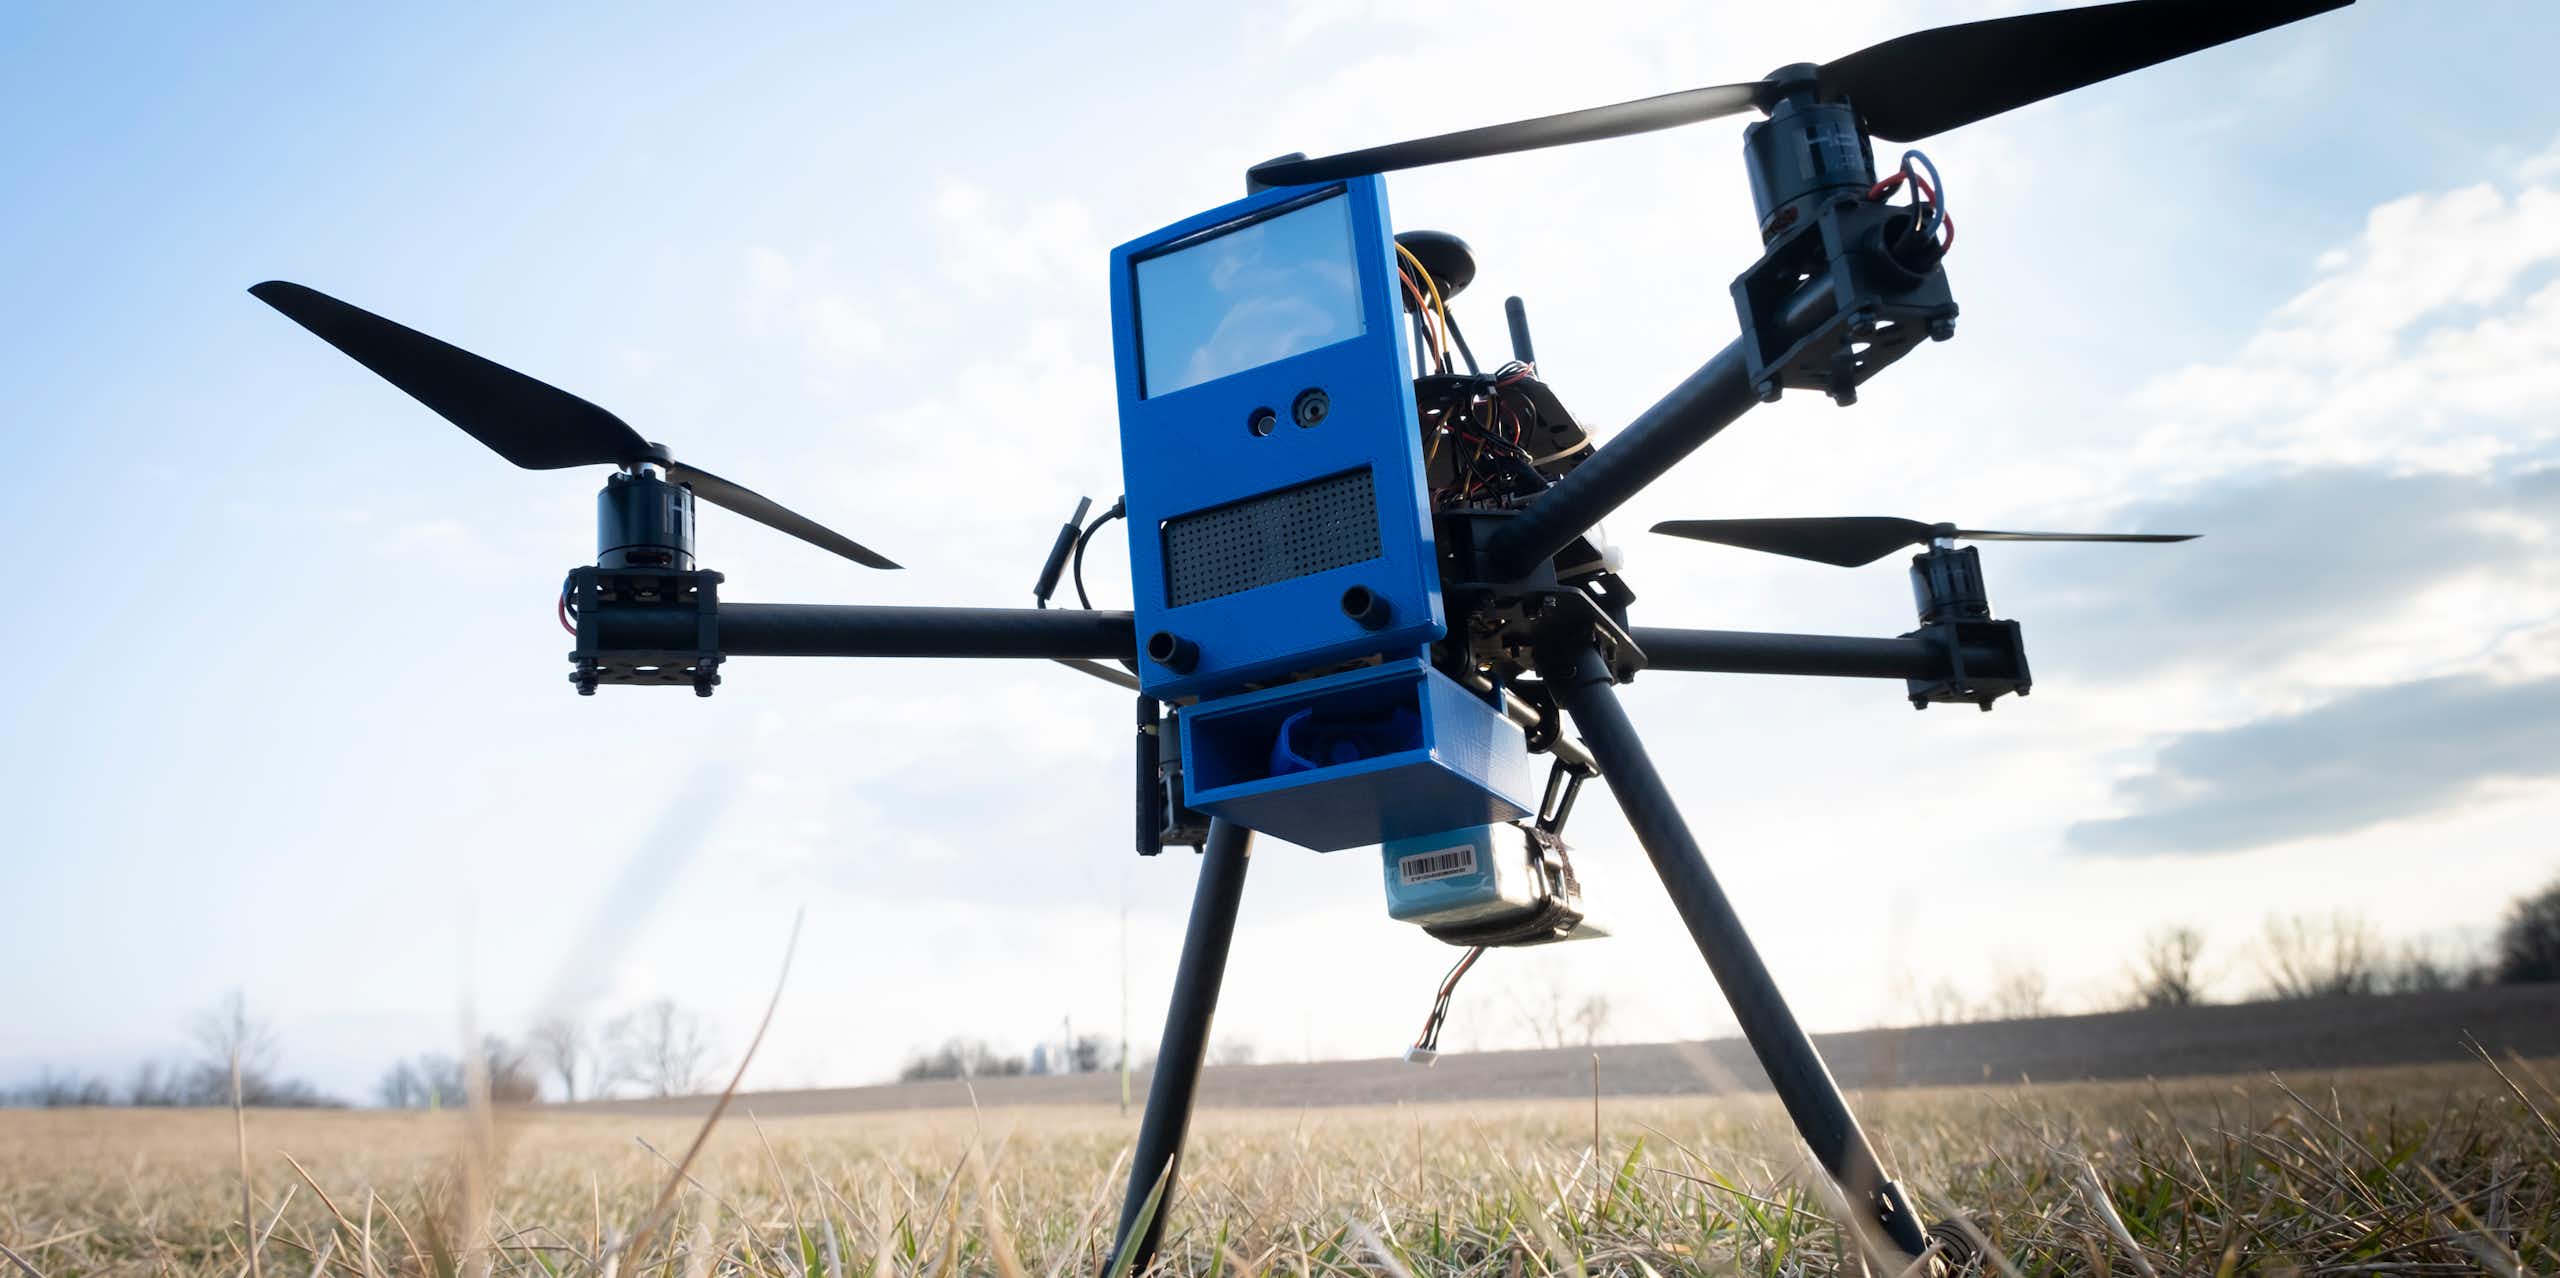 A photograph of a drone in a grassy field.